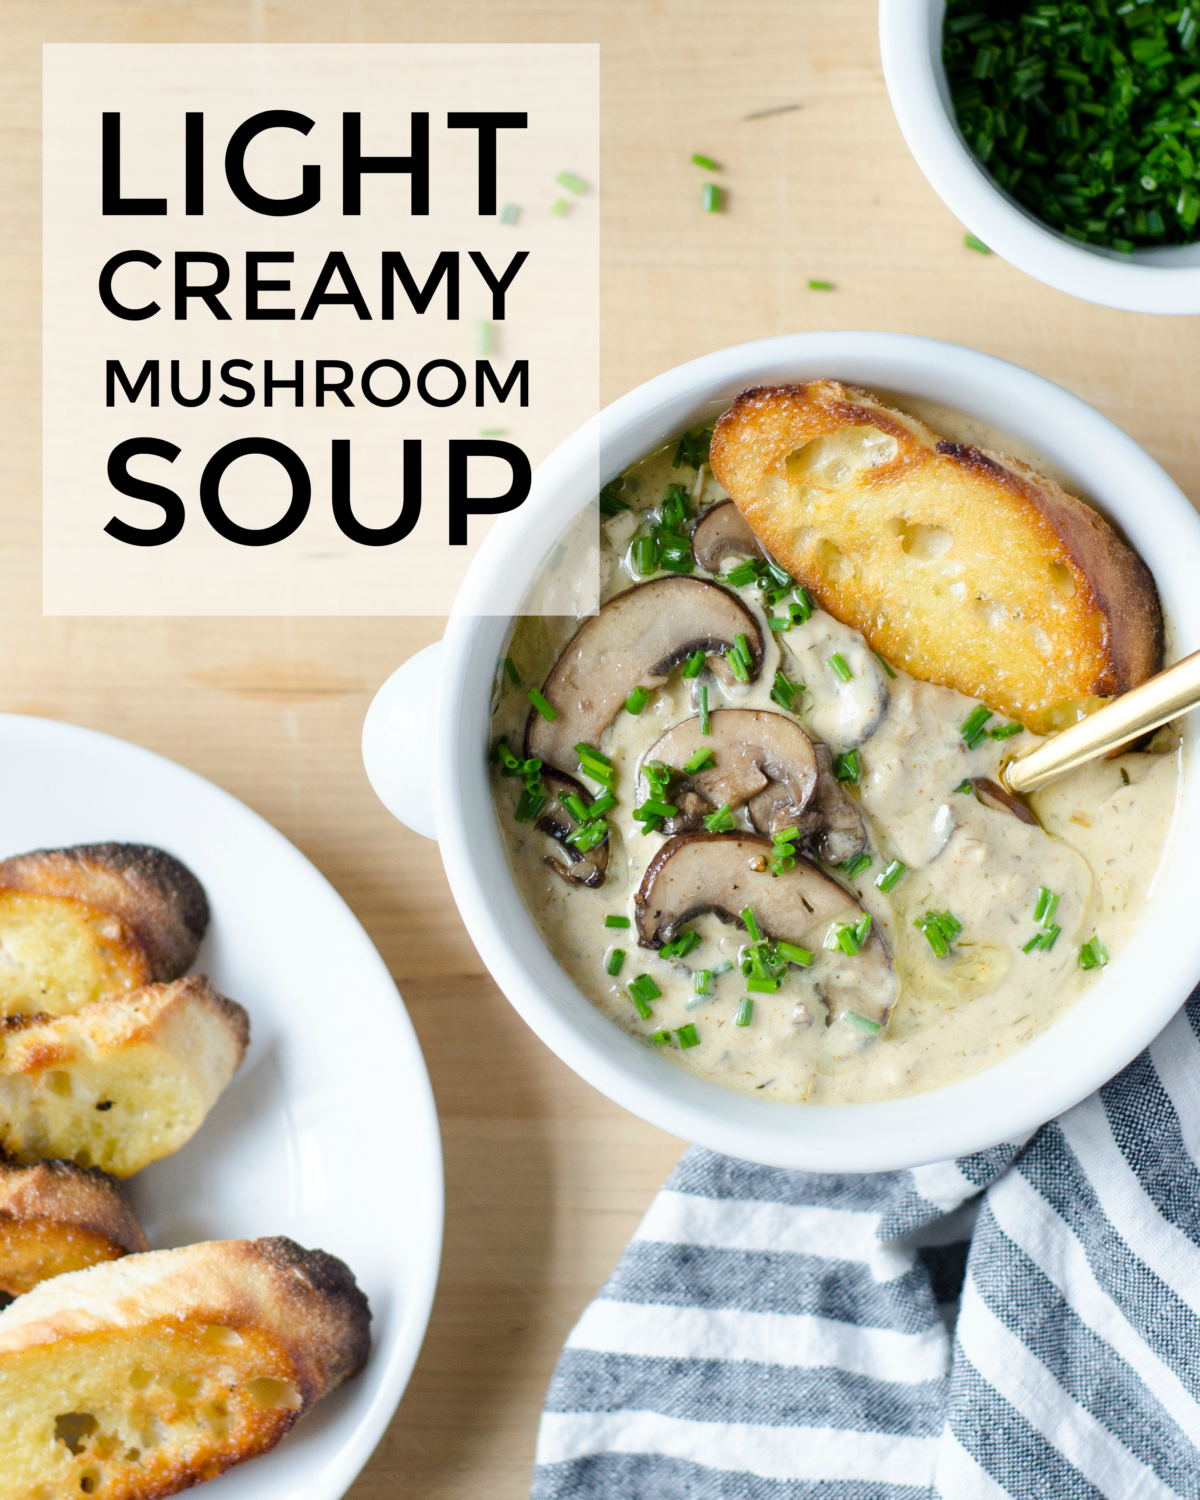 An easy recipe for light creamy mushroom soup (inspired by Hungarian mushroom soup) with an easy trick for luxurious creaminess with much fewer calories. So utterly delicious you'll never know you're eating light!